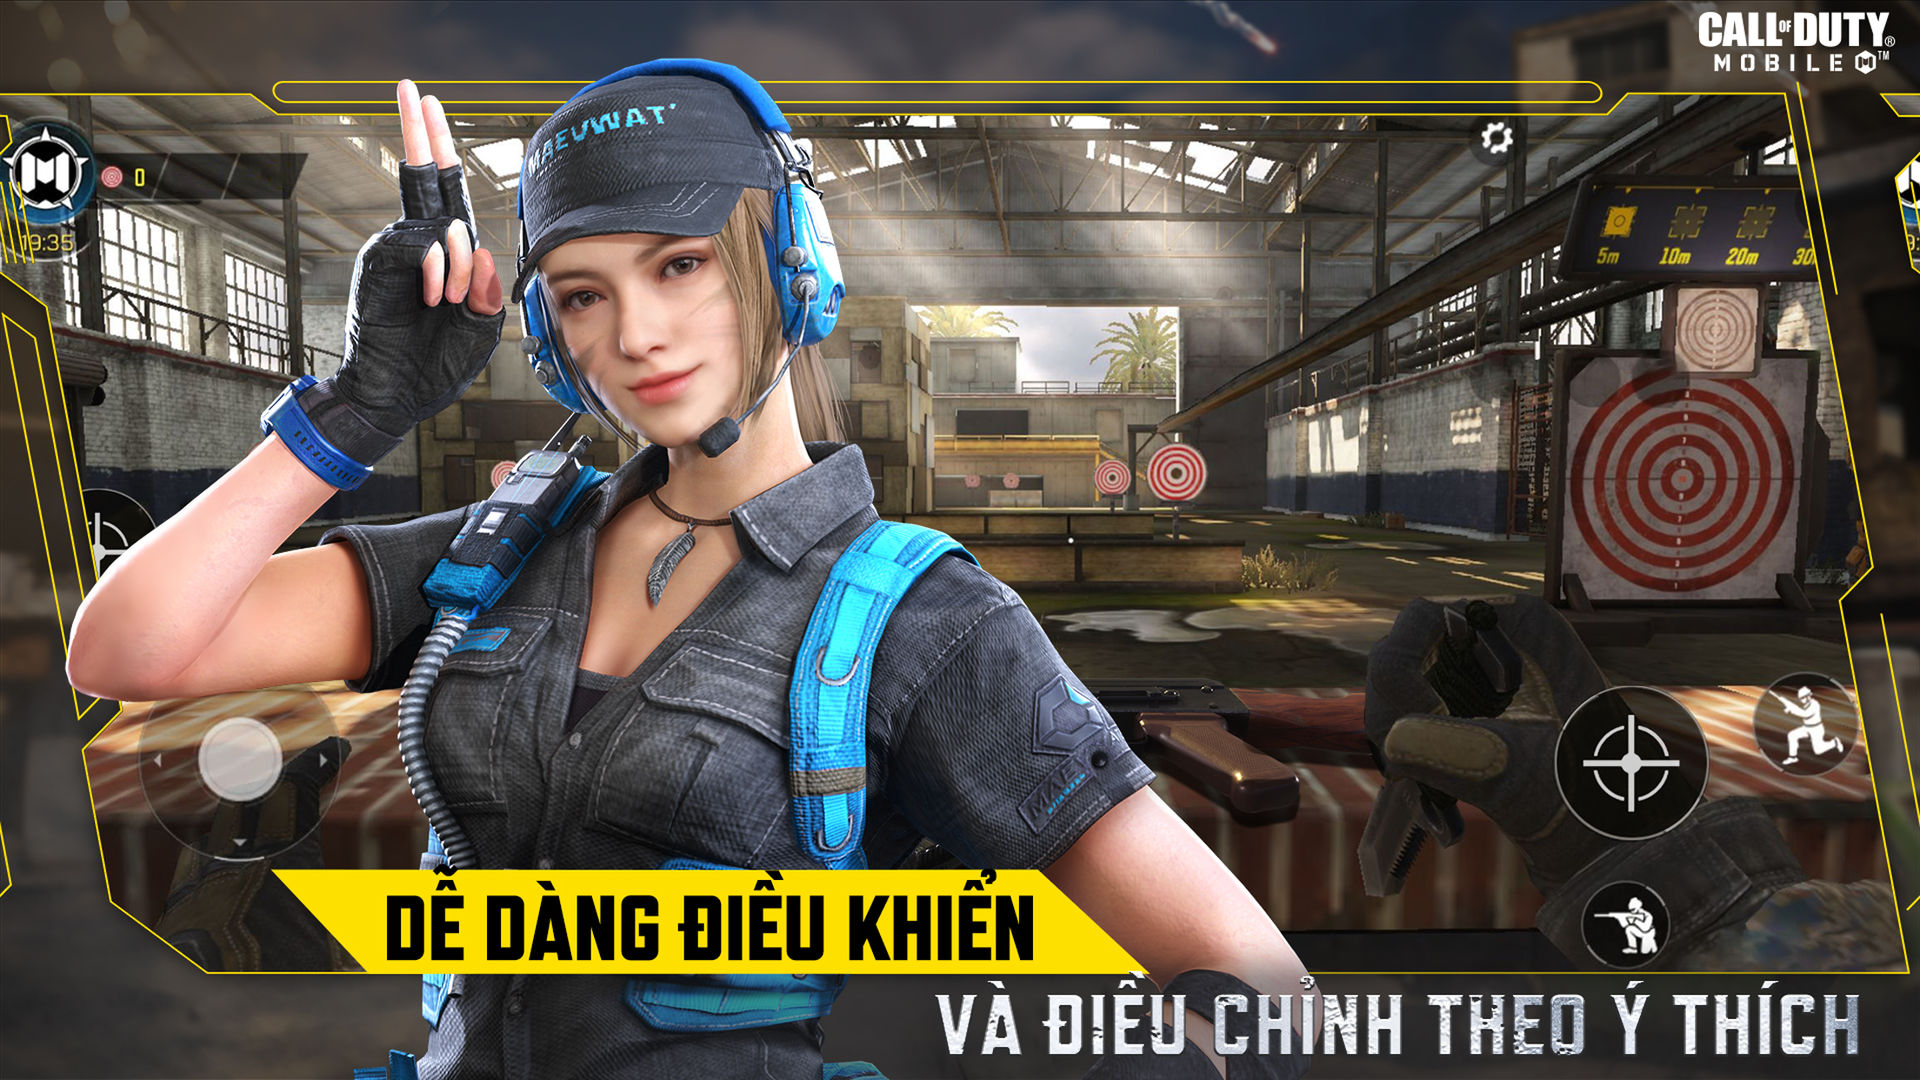 Screenshot of Call of Duty: Mobile VN